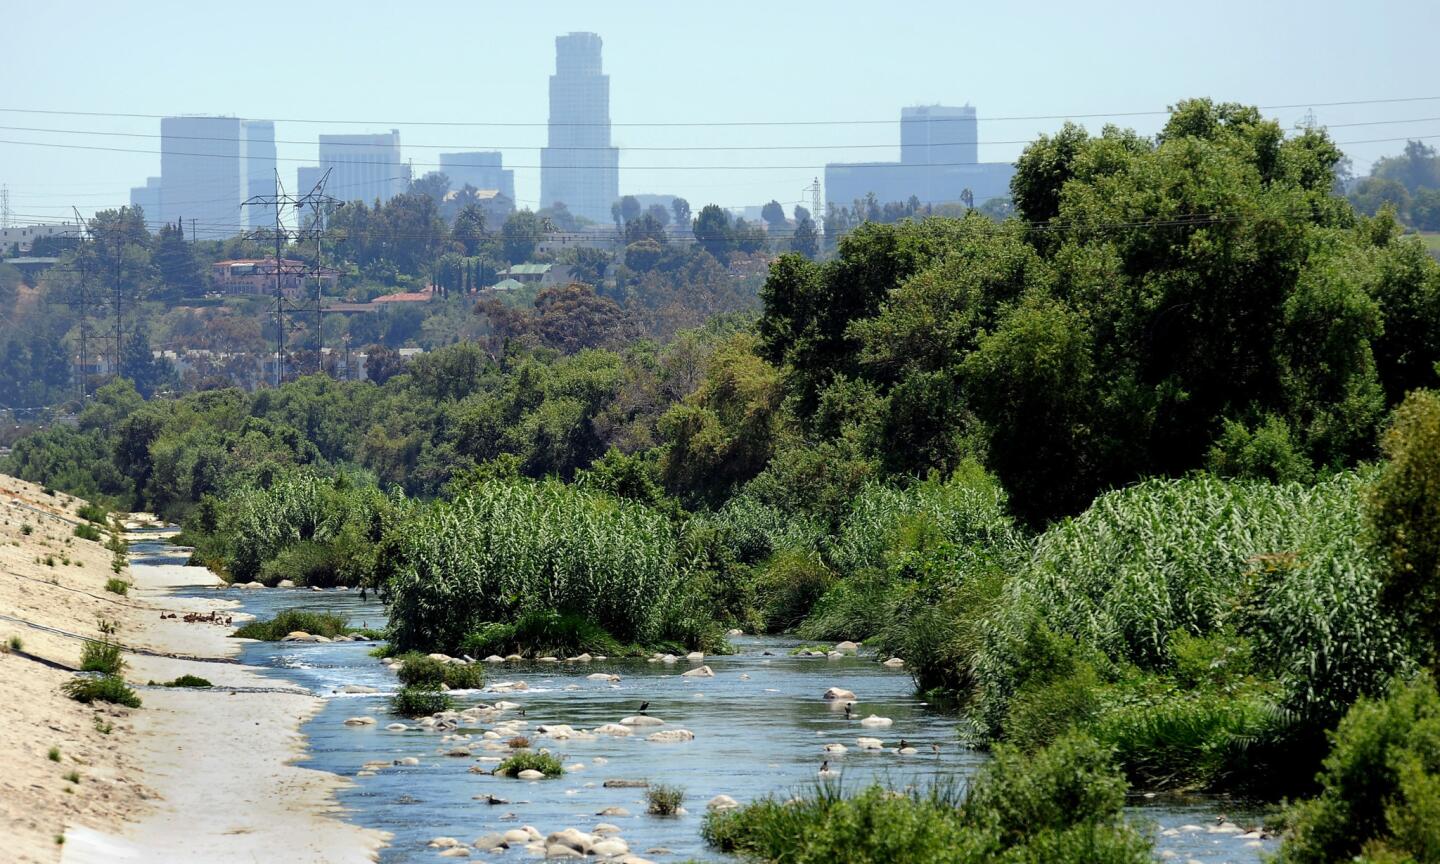 Progress on remaking the Los Angeles River